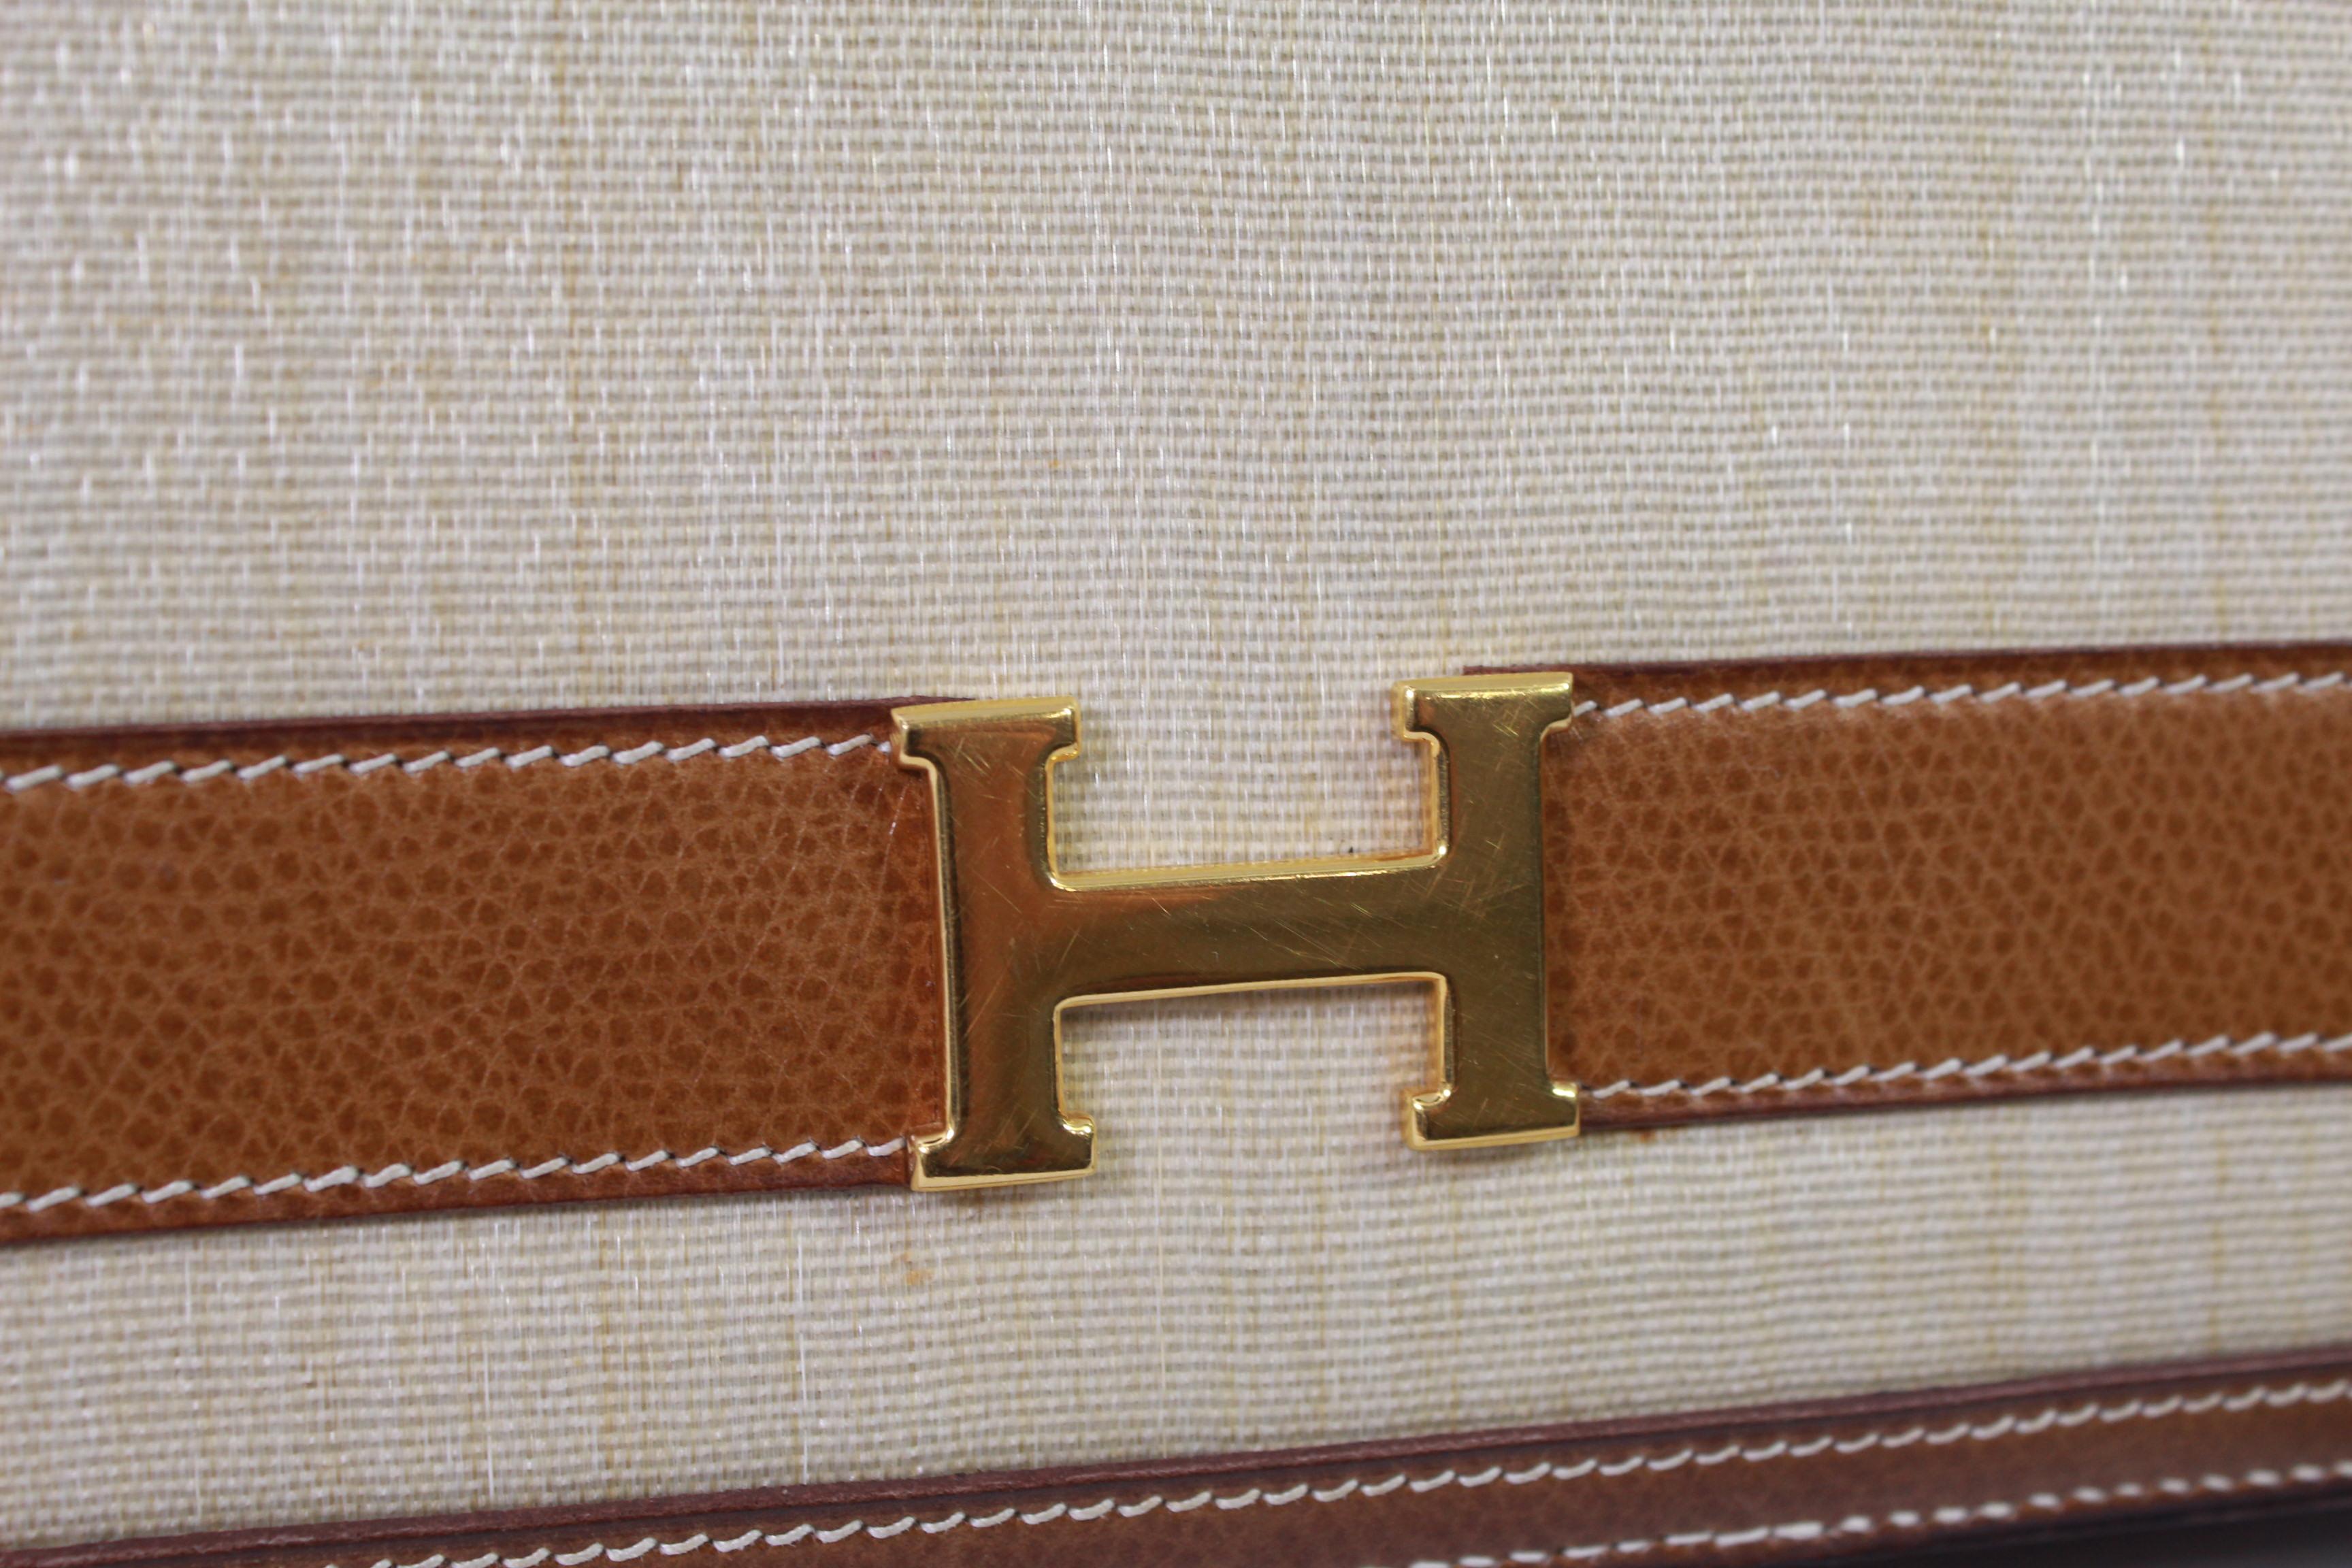 Vintage Hermes Lydie shoulder bag in leather and crinoline.

good vintage condition some slight signs of wear.

Bag from 1979

Detachable strap 

Size 23x15

Interior in really good condition.